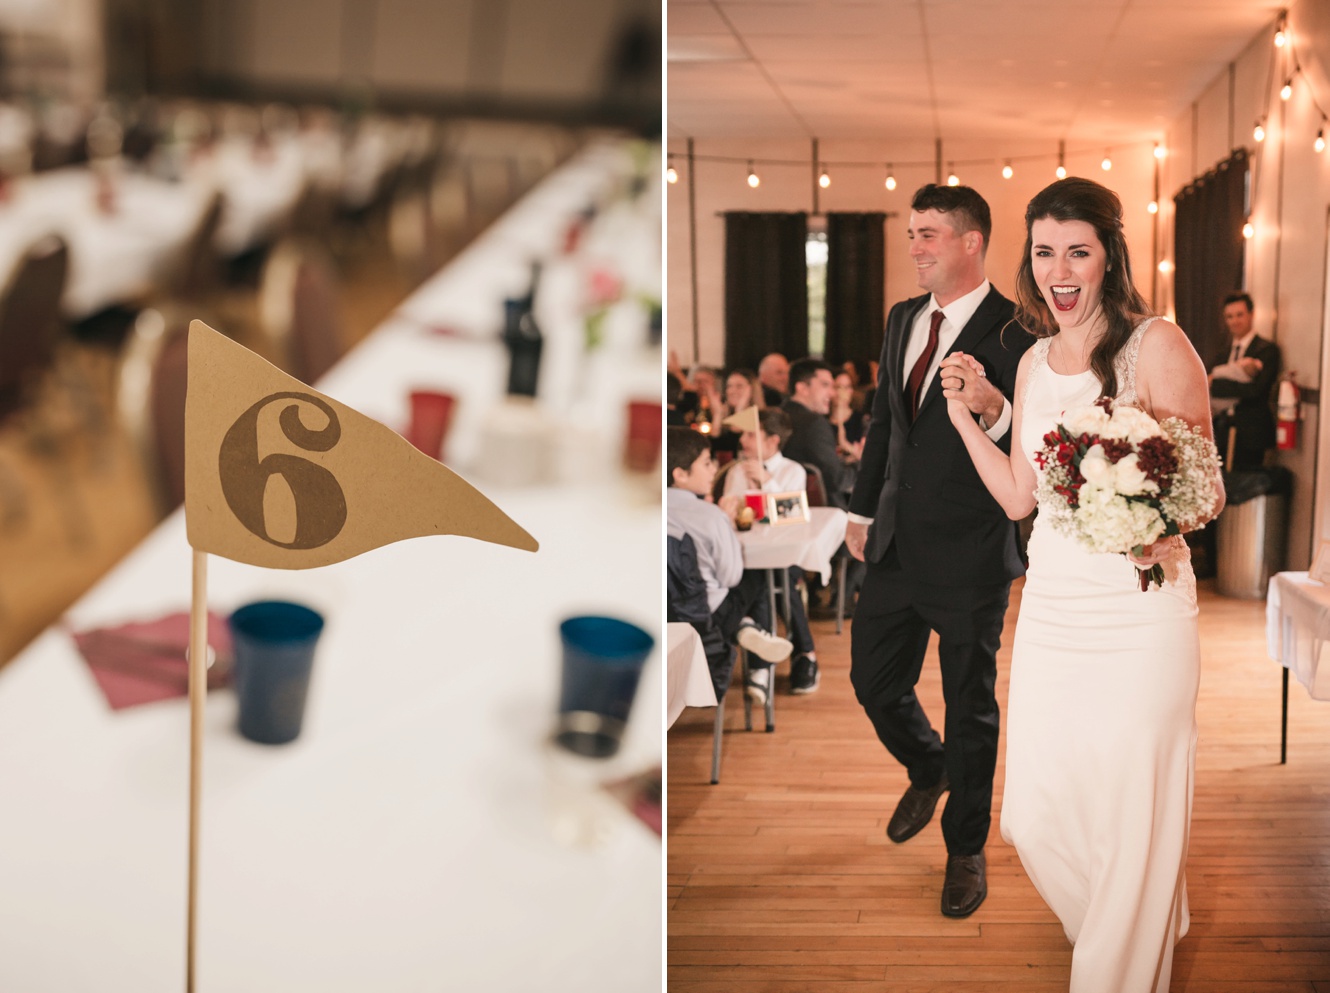 Learn how to take amazing wedding reception photos